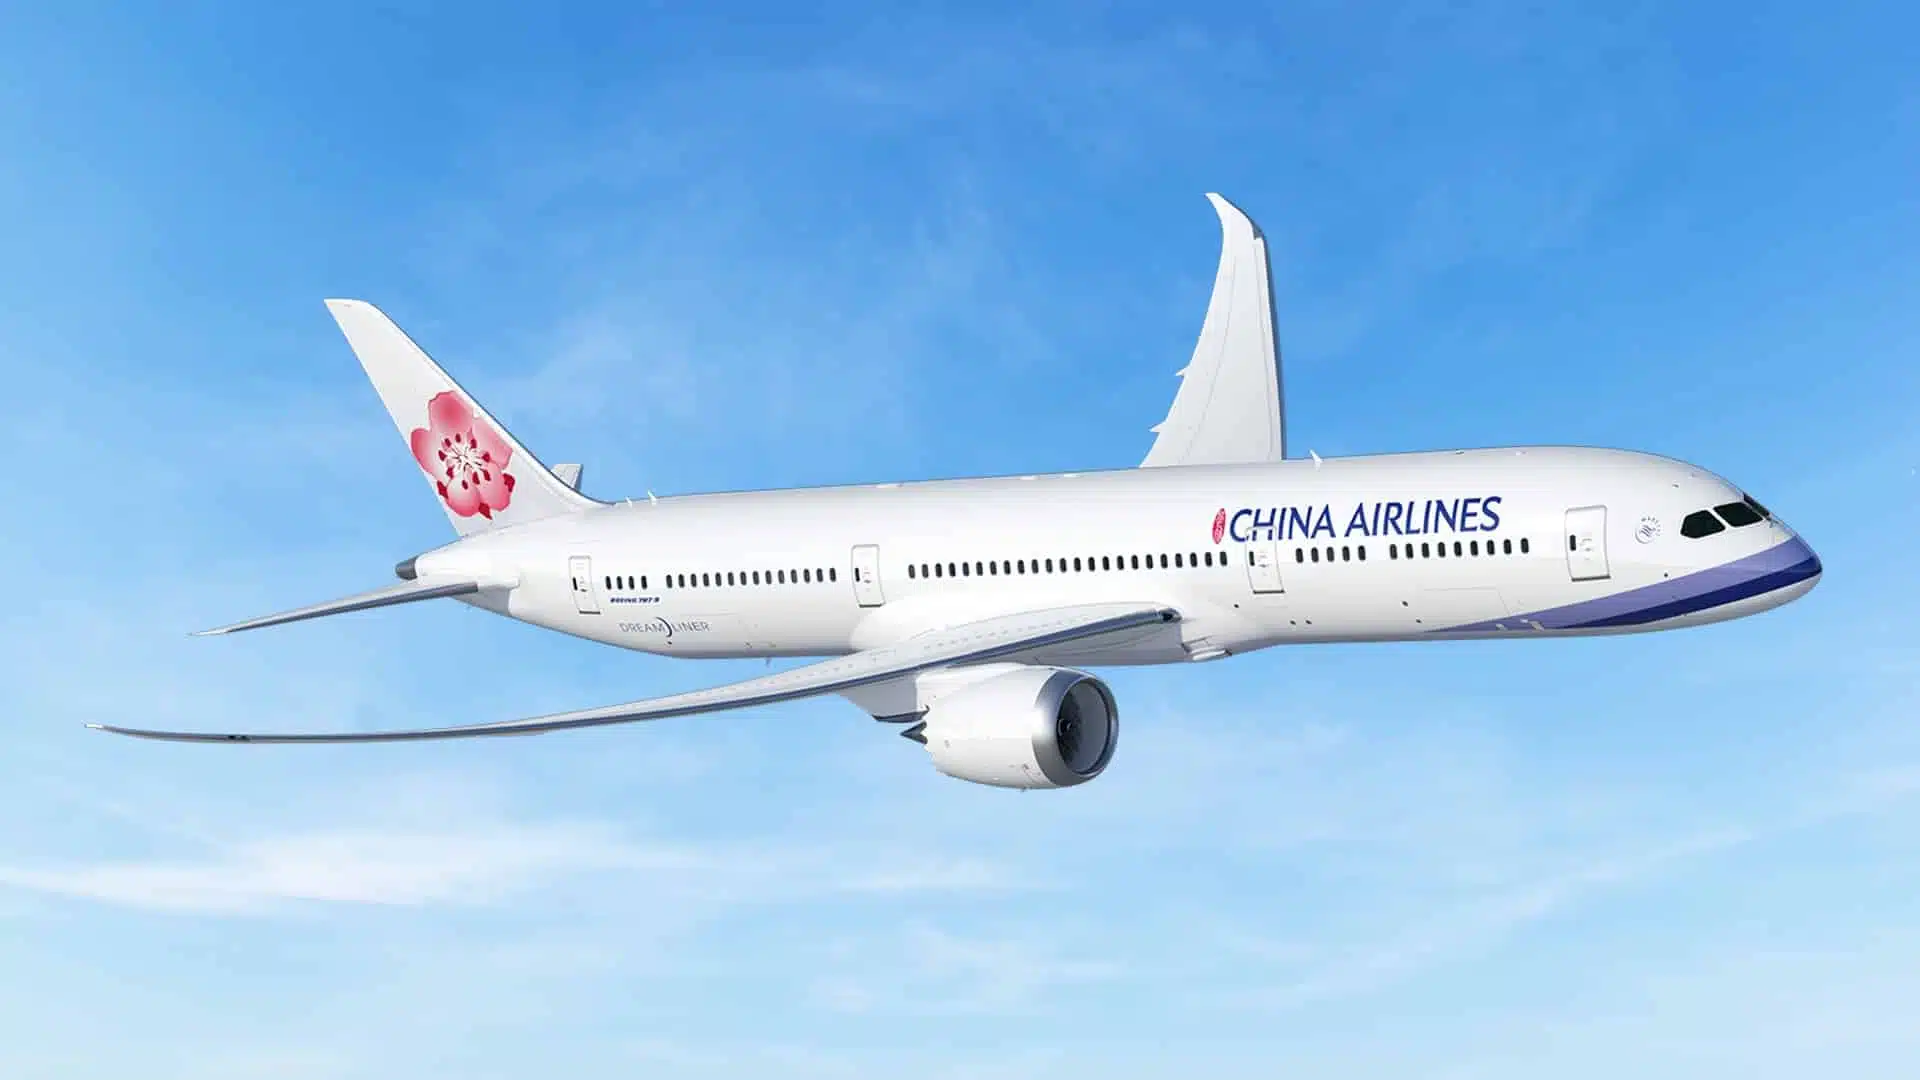 China Airlines Order for Up to 24 Boeing 787 Dreamliners